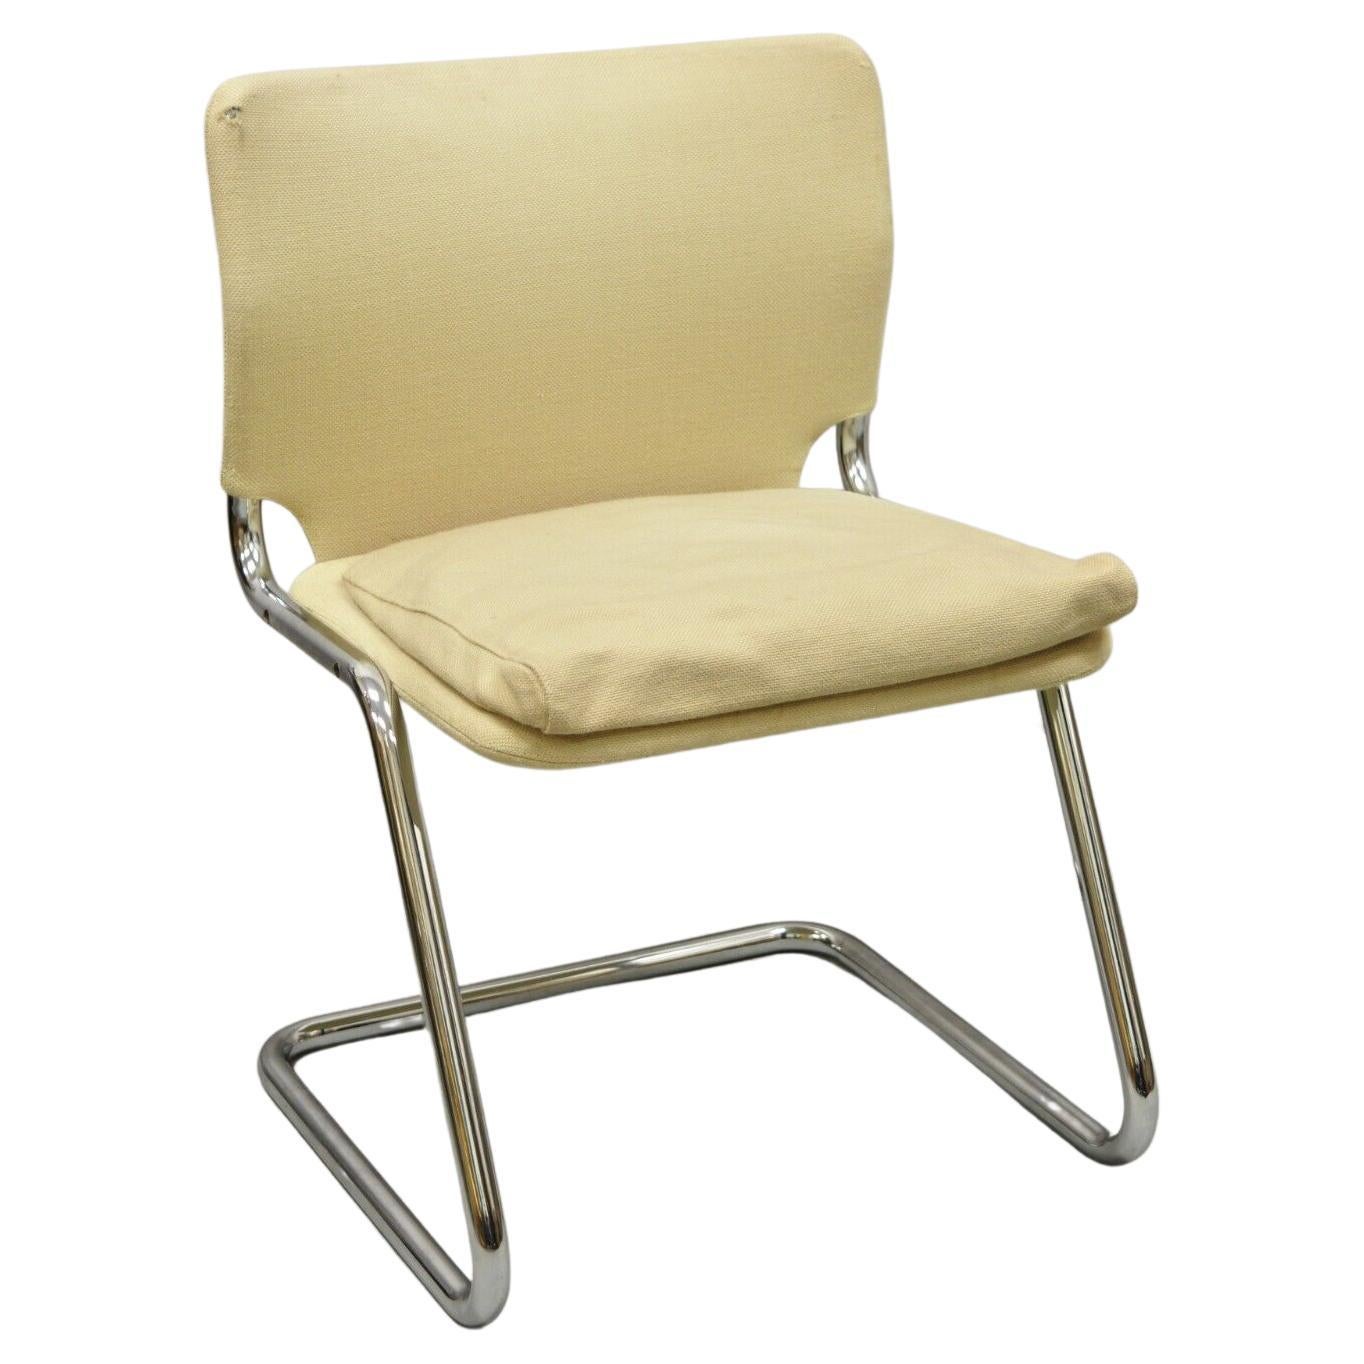 Mid-Century Modern Tubular Chrome Cantilever Side Chair with Burlap Seat For Sale